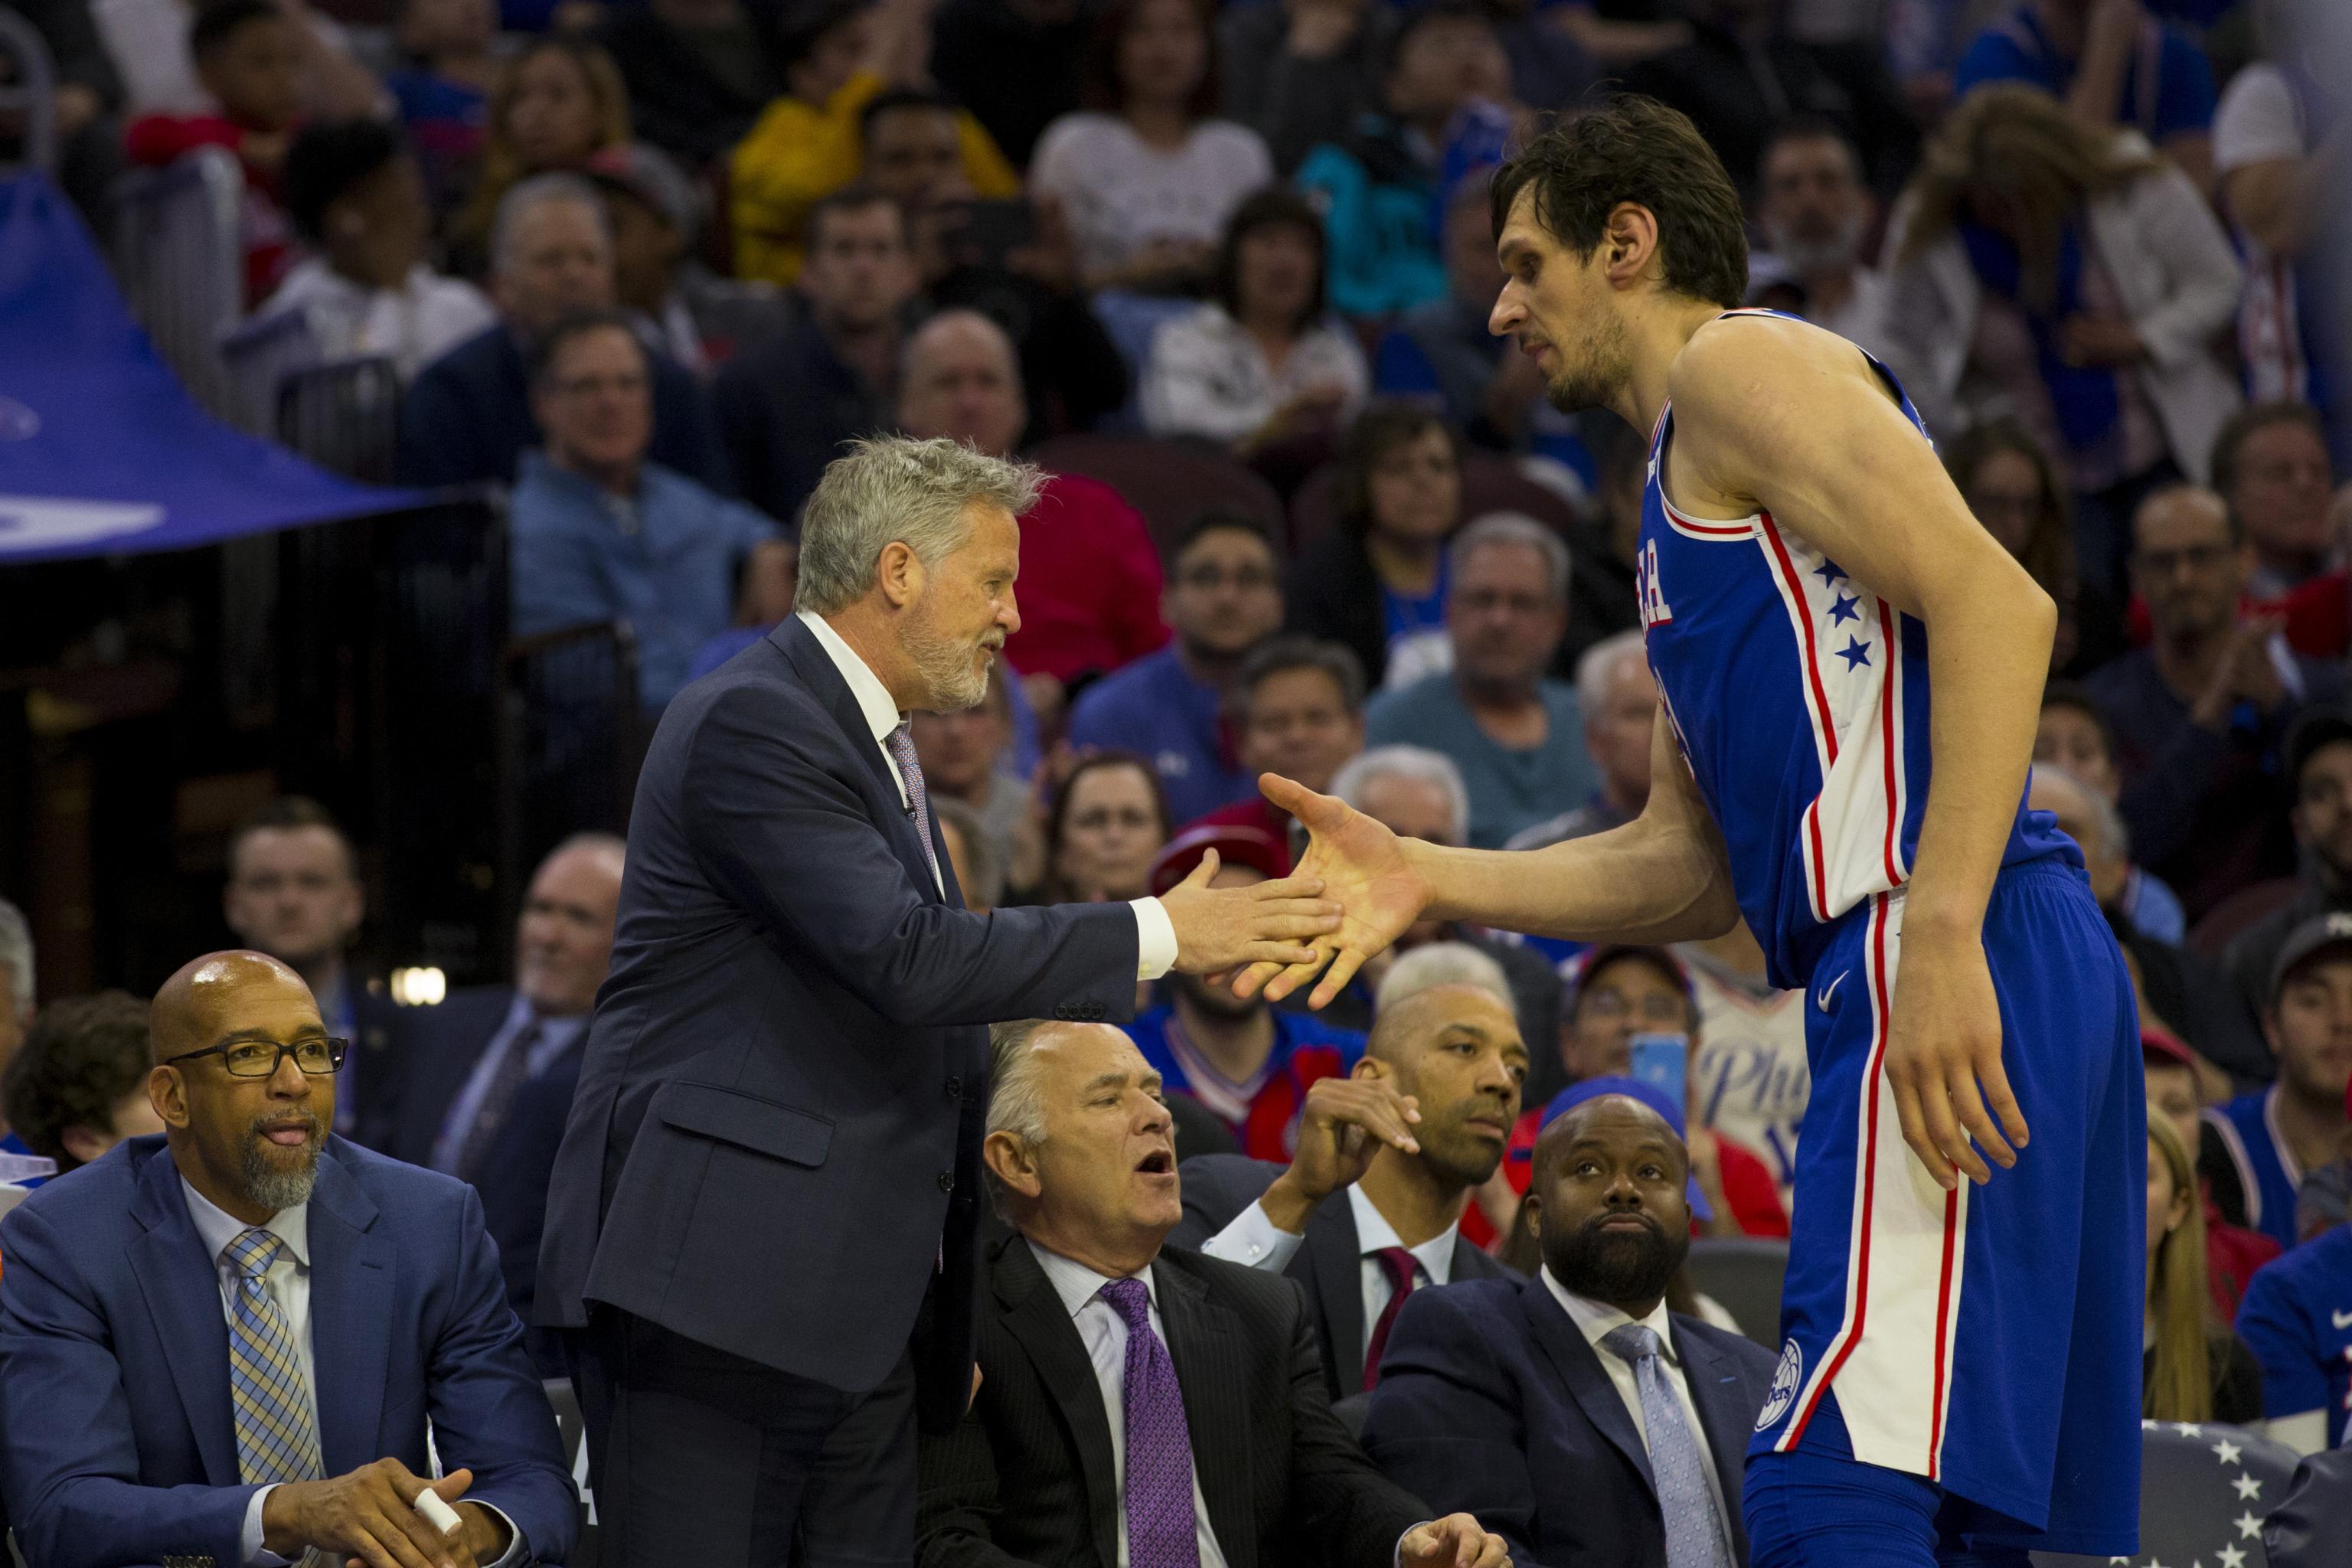 Boban Marjanovic shaking hands. That's all